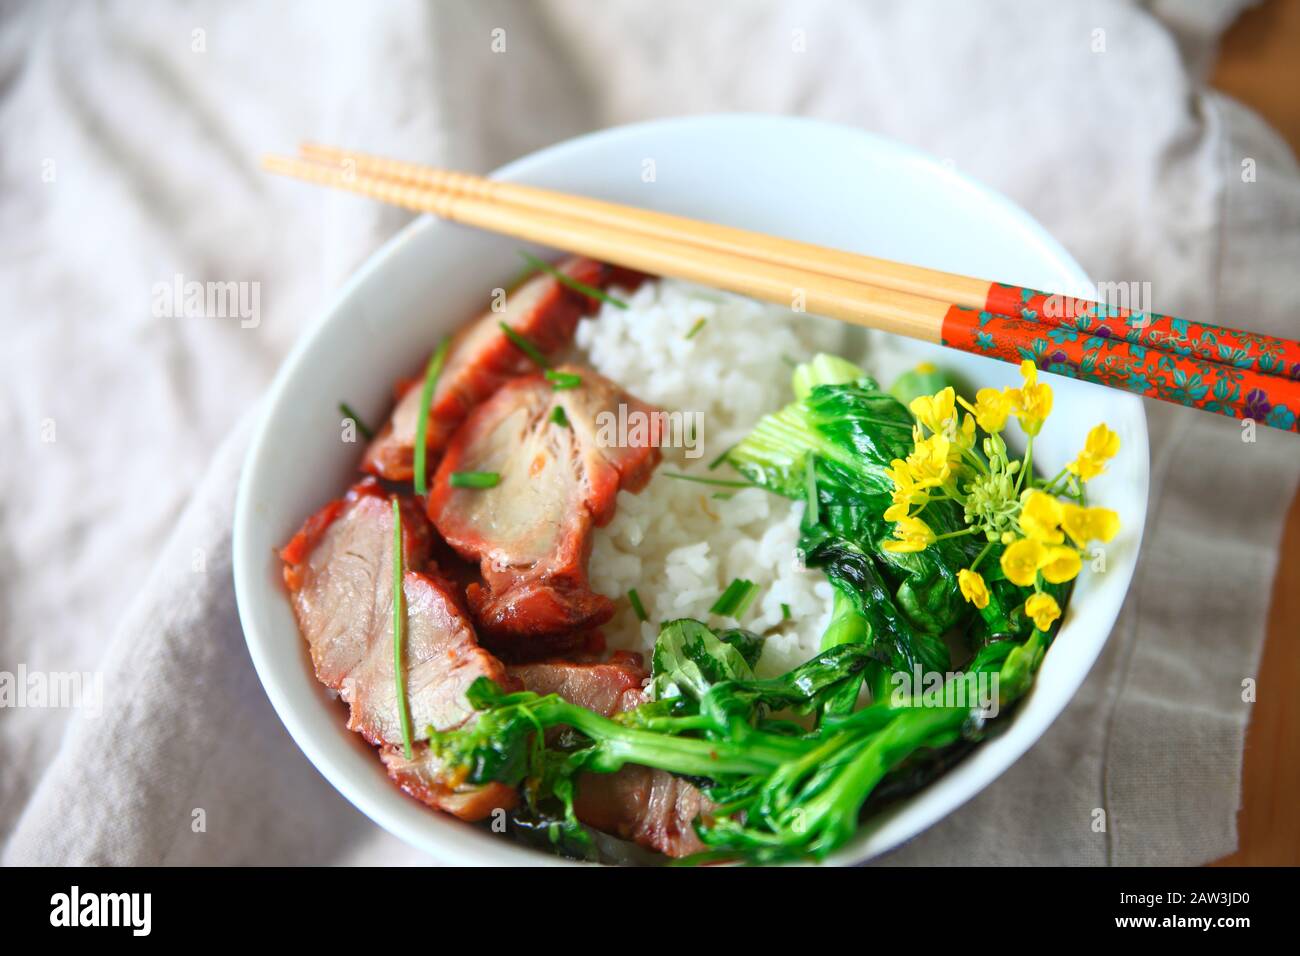 Roast pork and Asian greens with edible flowers on rice Stock Photo